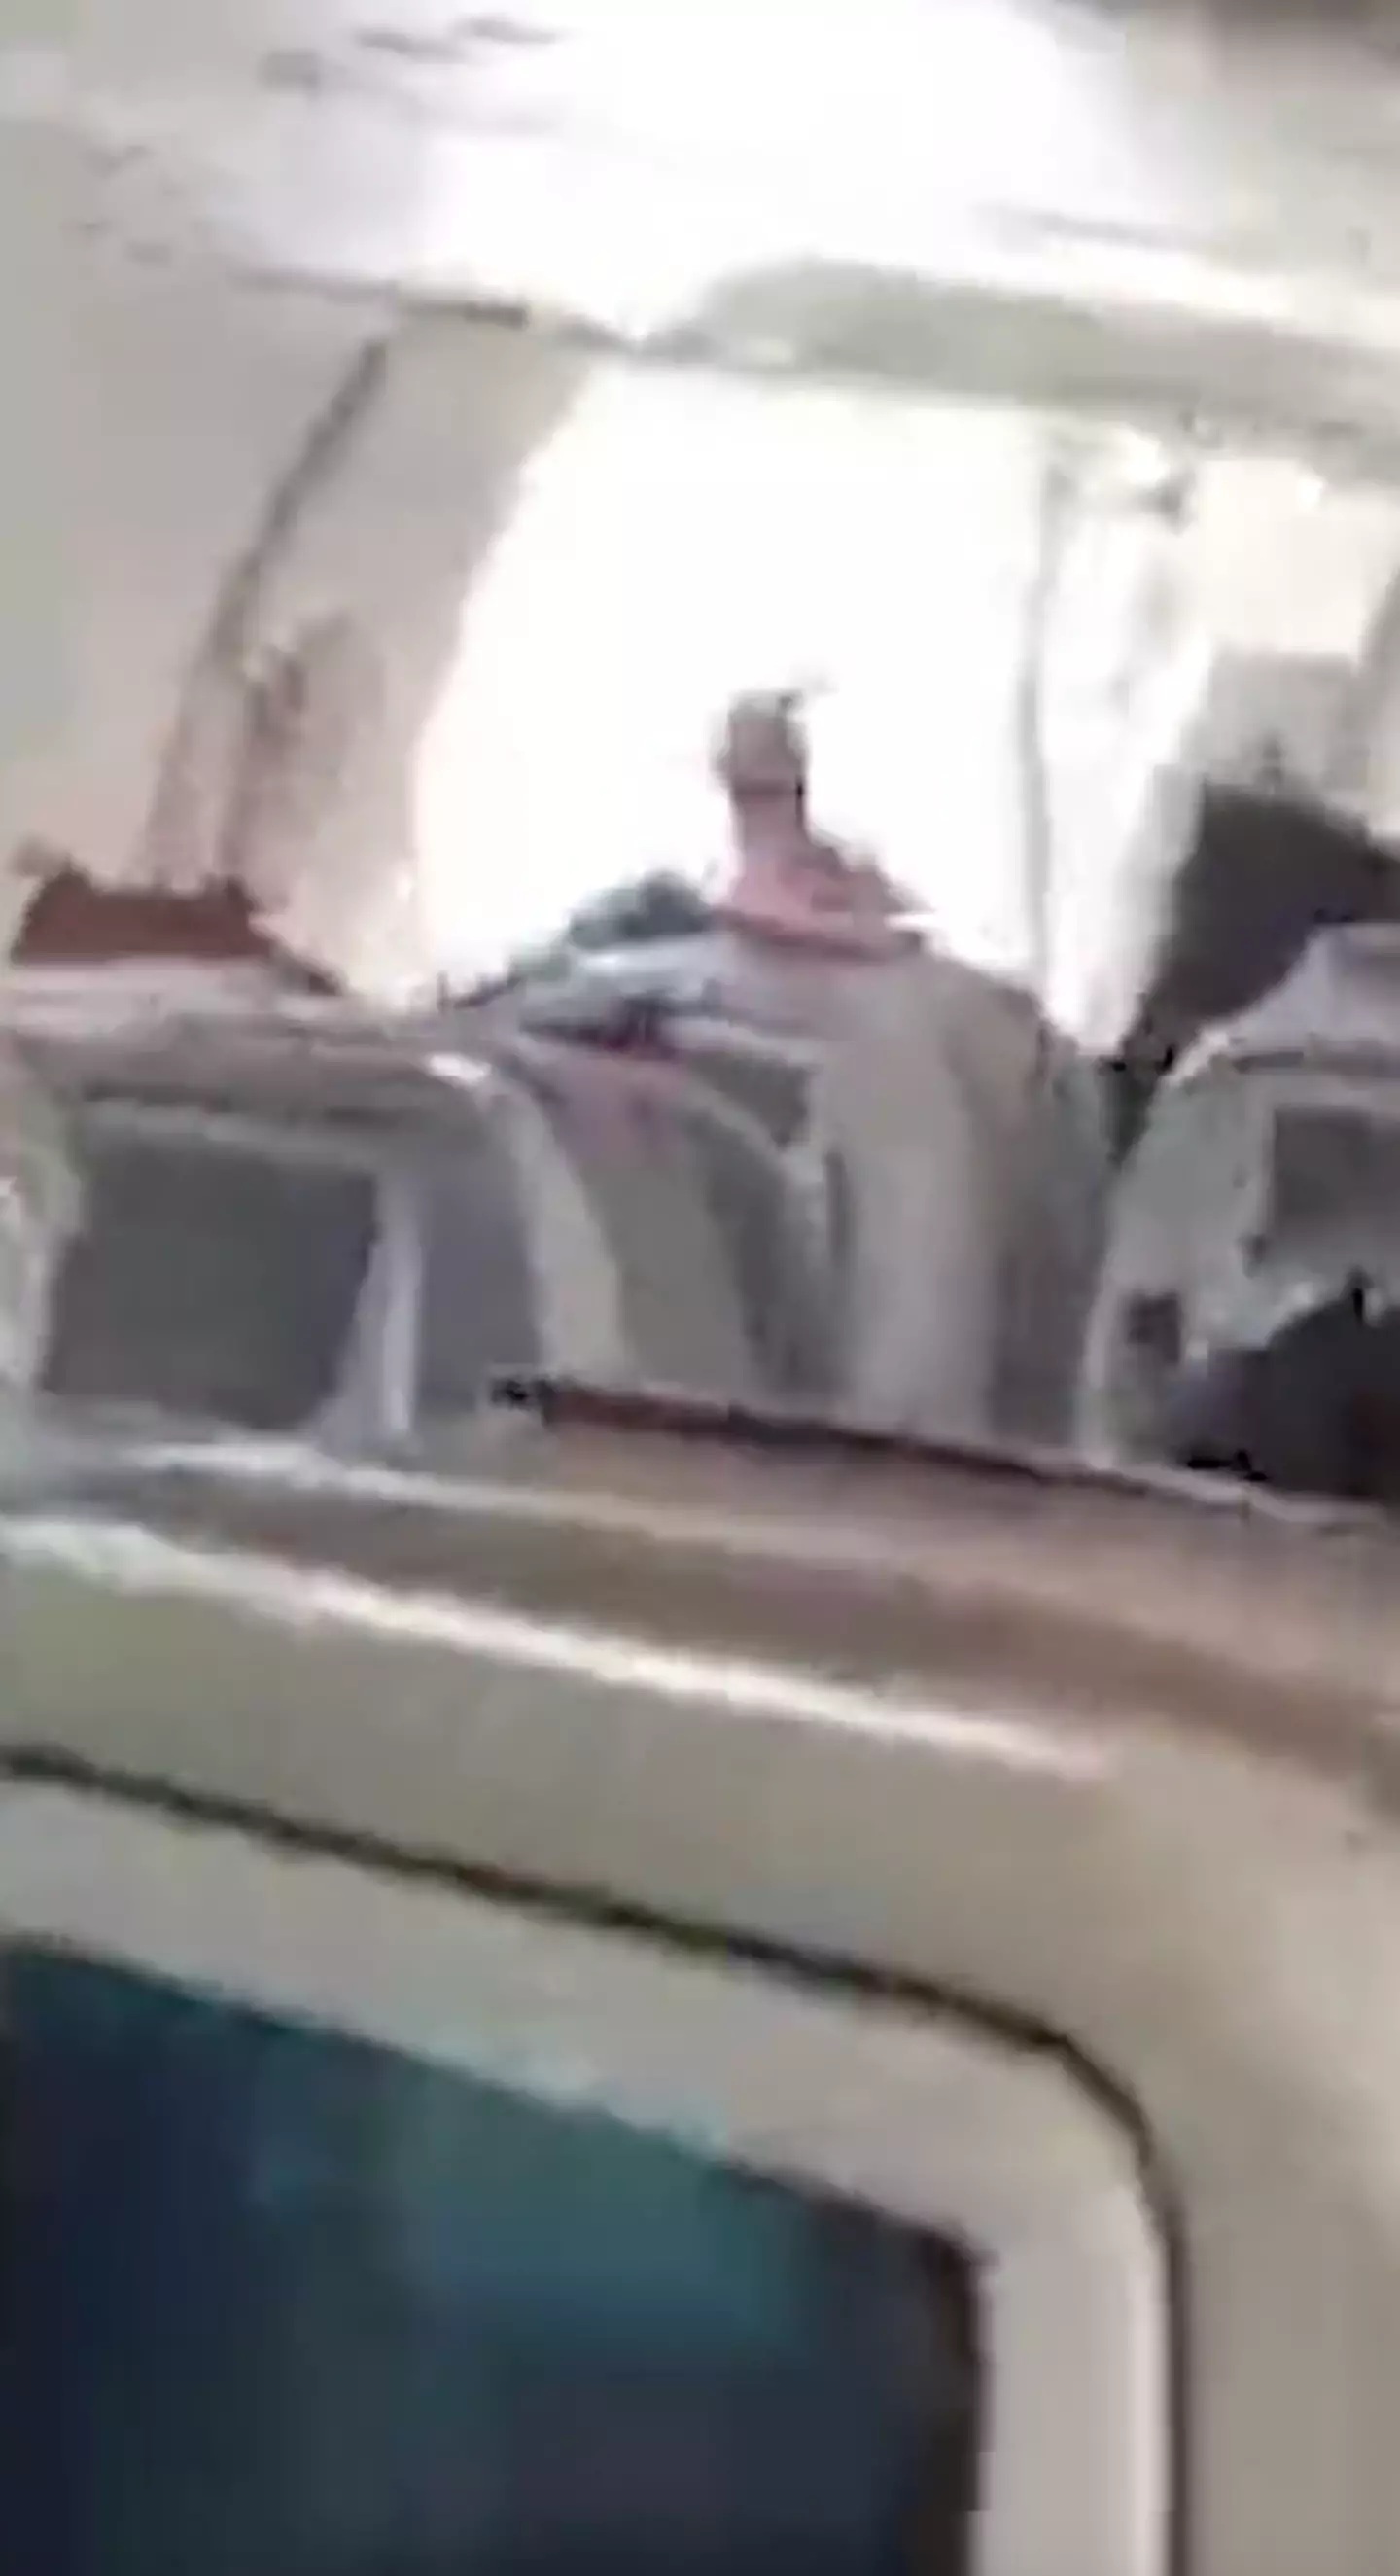 The passenger has since been arrested for opening the emergency level mid-flight.